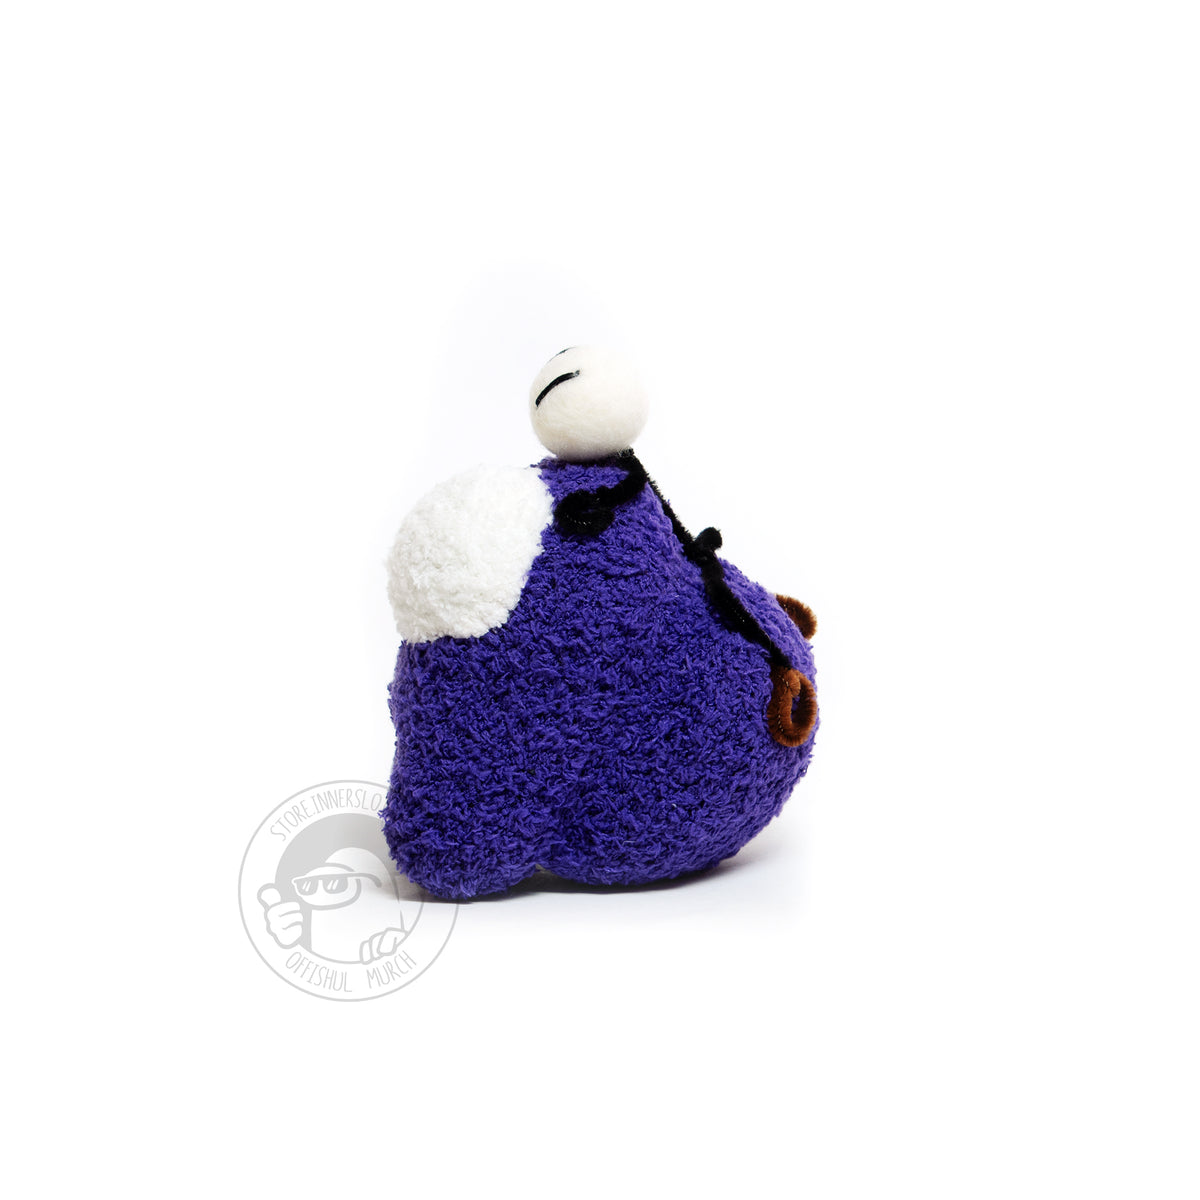 A left-facing profile product photograph of the Purple Crewmate plush with the tiny needle felted and pipe cleaner Henry Stickmin figure on top of its head. From this angle you can see the Crewmate’s big, round, and thick backpack in full view.